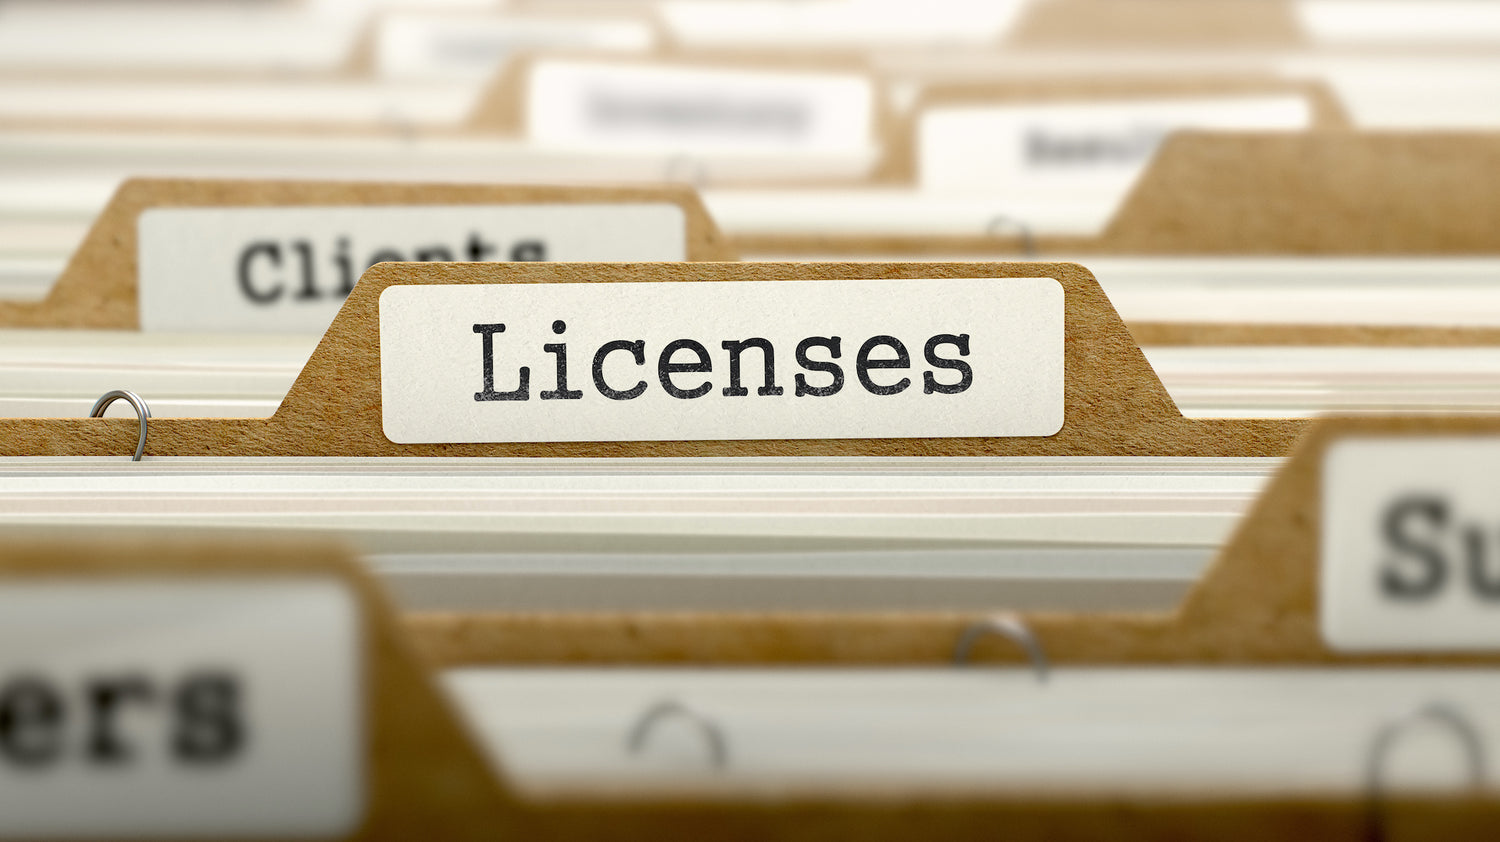 Do You Need a License to Sell Skincare Products?